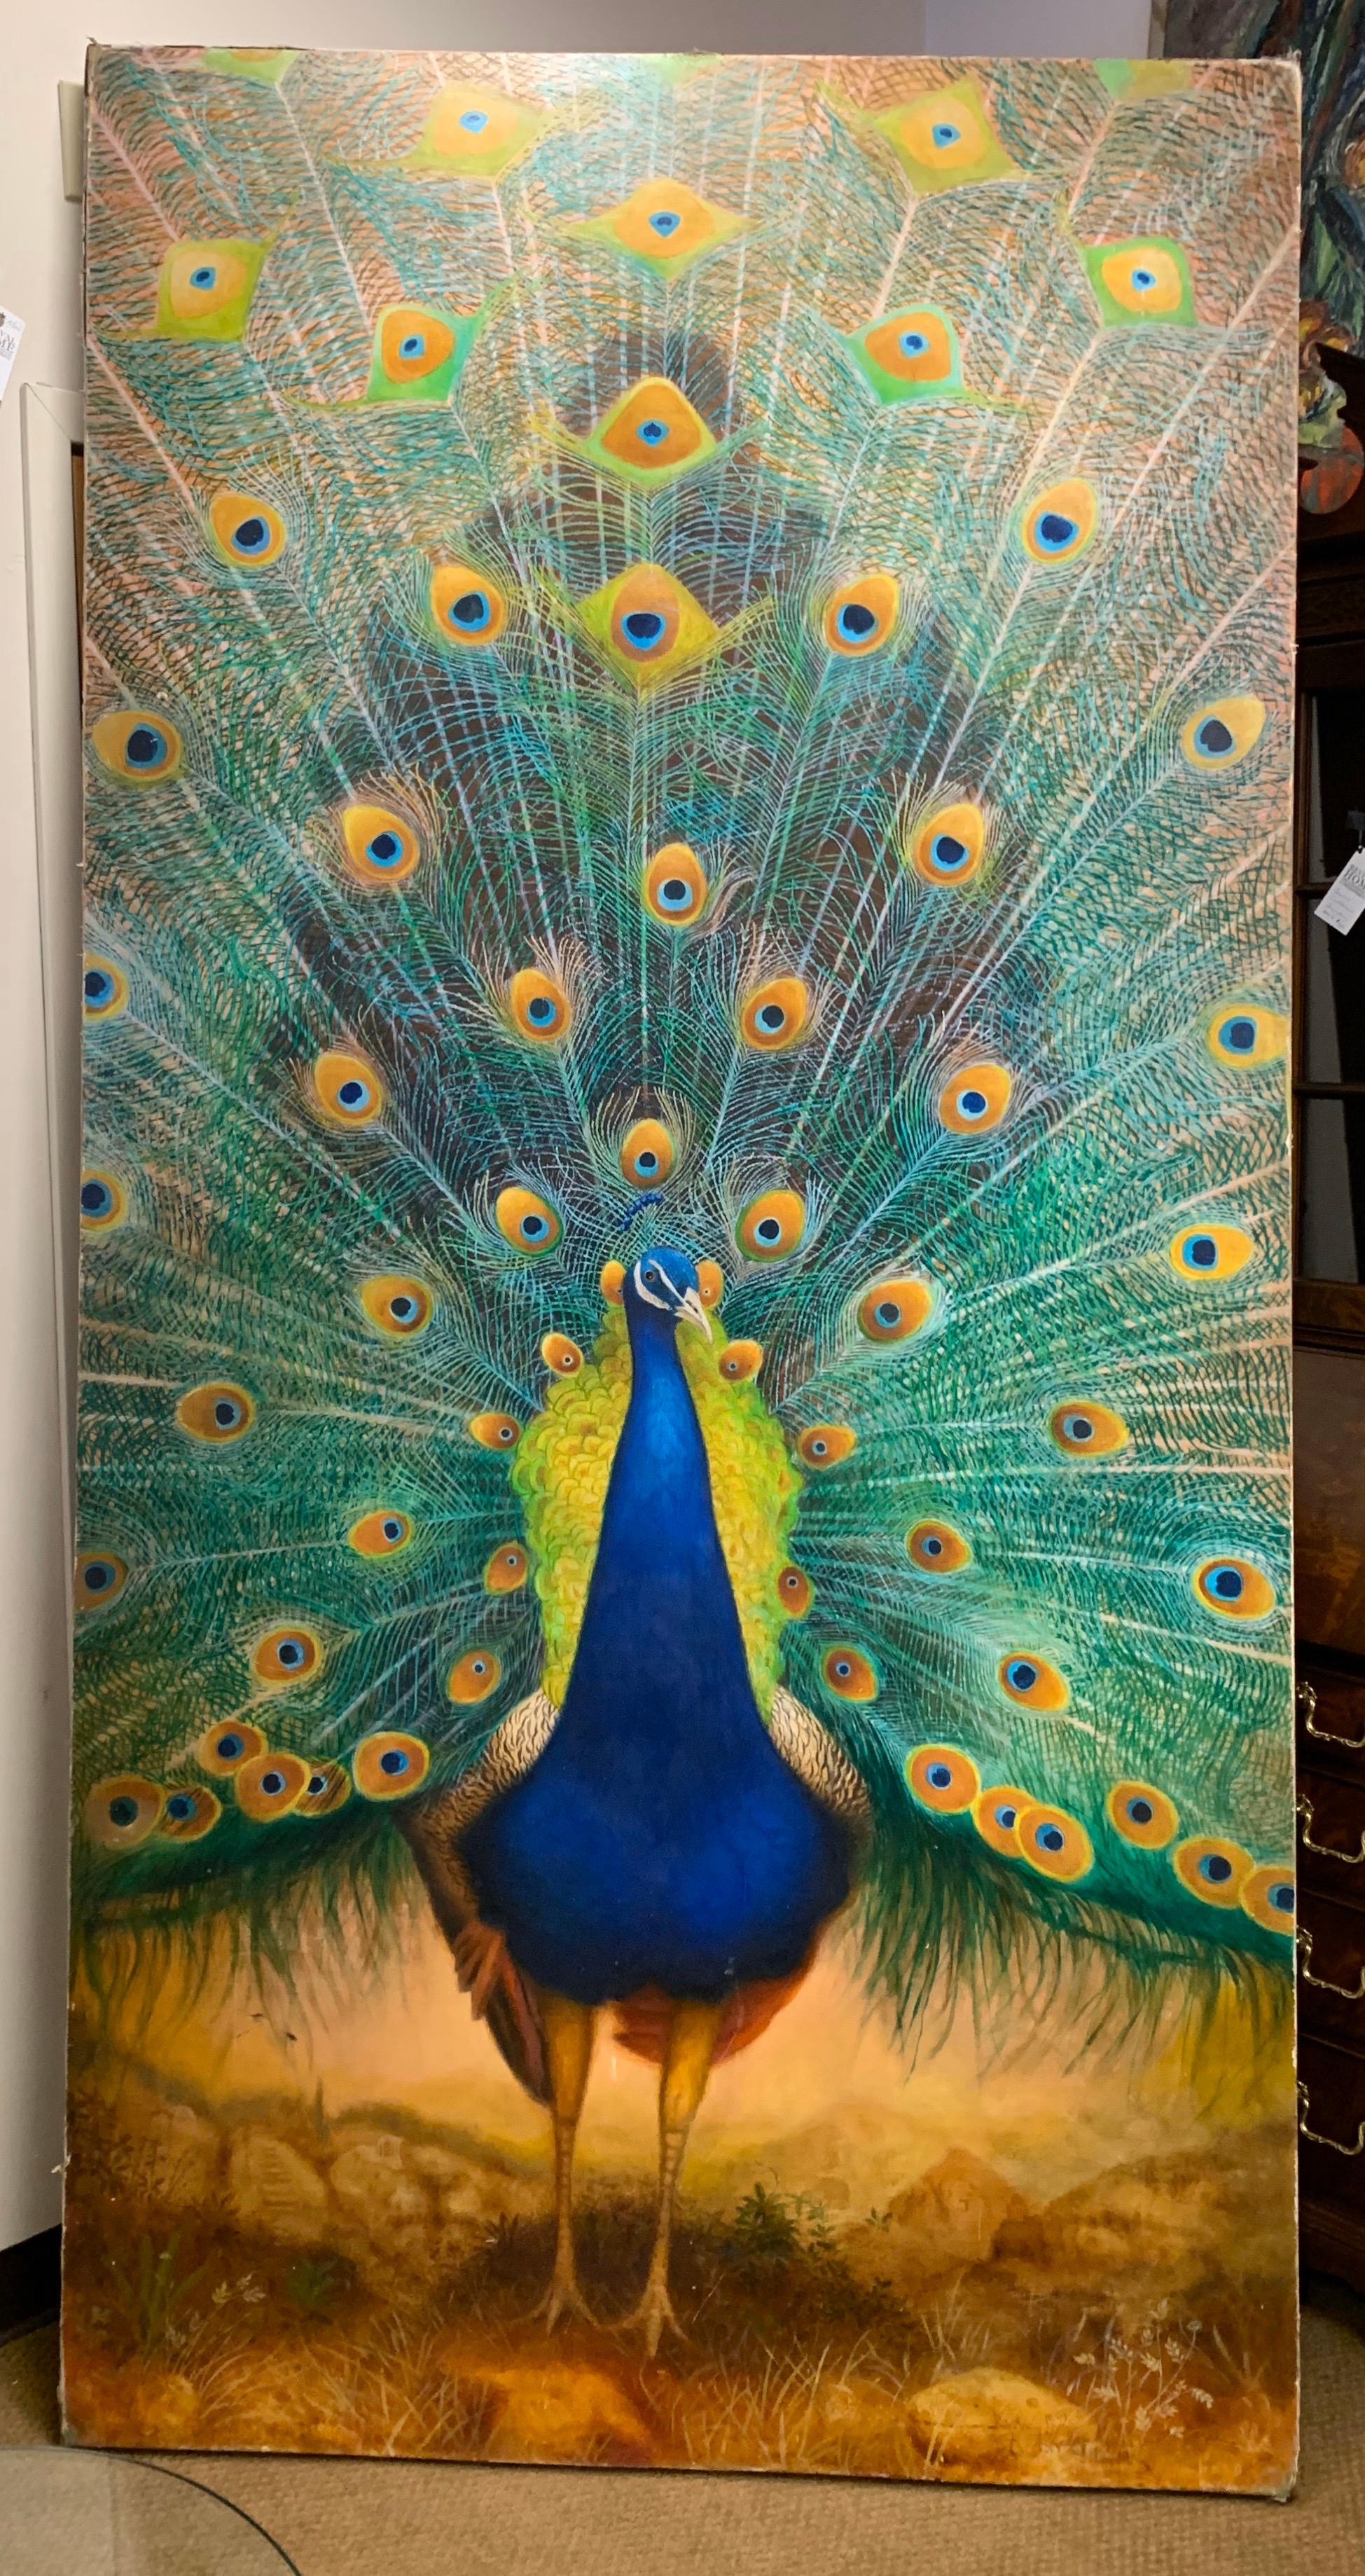 Stunning 8 ft. painting on linen and mounted on board depicts a proud peacock with a colorful plume of feathers. Very heavy close to 90lbs. Signed illegibly lower right. Large enough to be used as a door as well.